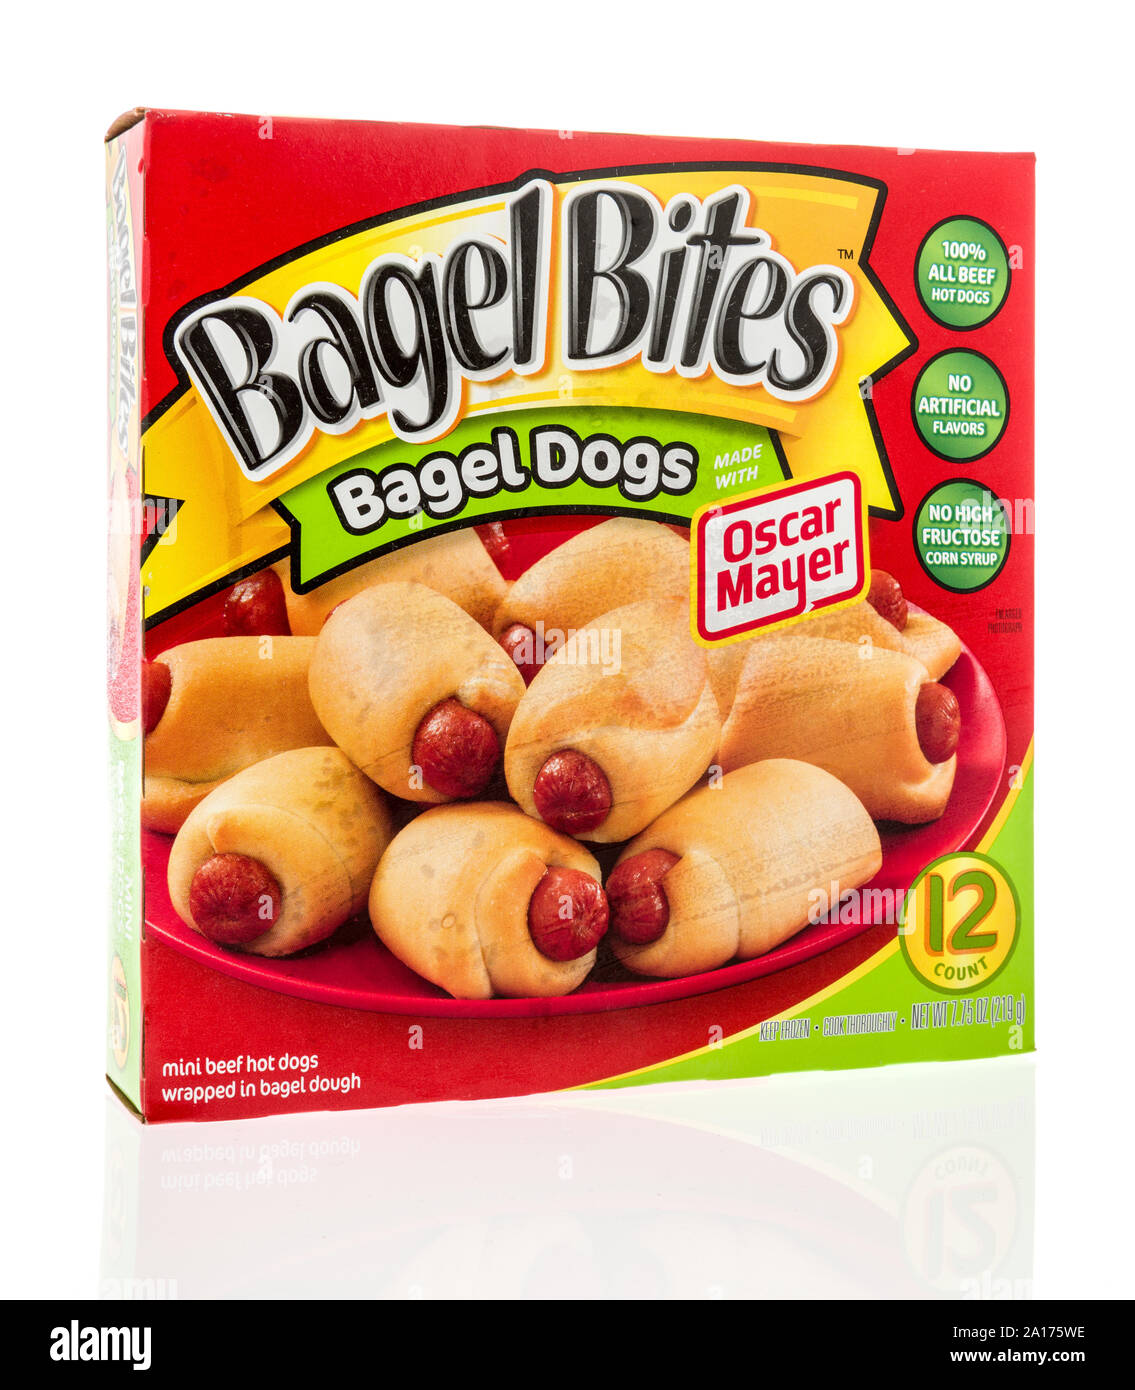 Winneconne, WI - 10 September 2019: A package of Bagel Bites bagel dogs pigs in the blanket with oscar Mayer hot dogs on an isolated background. Stock Photo